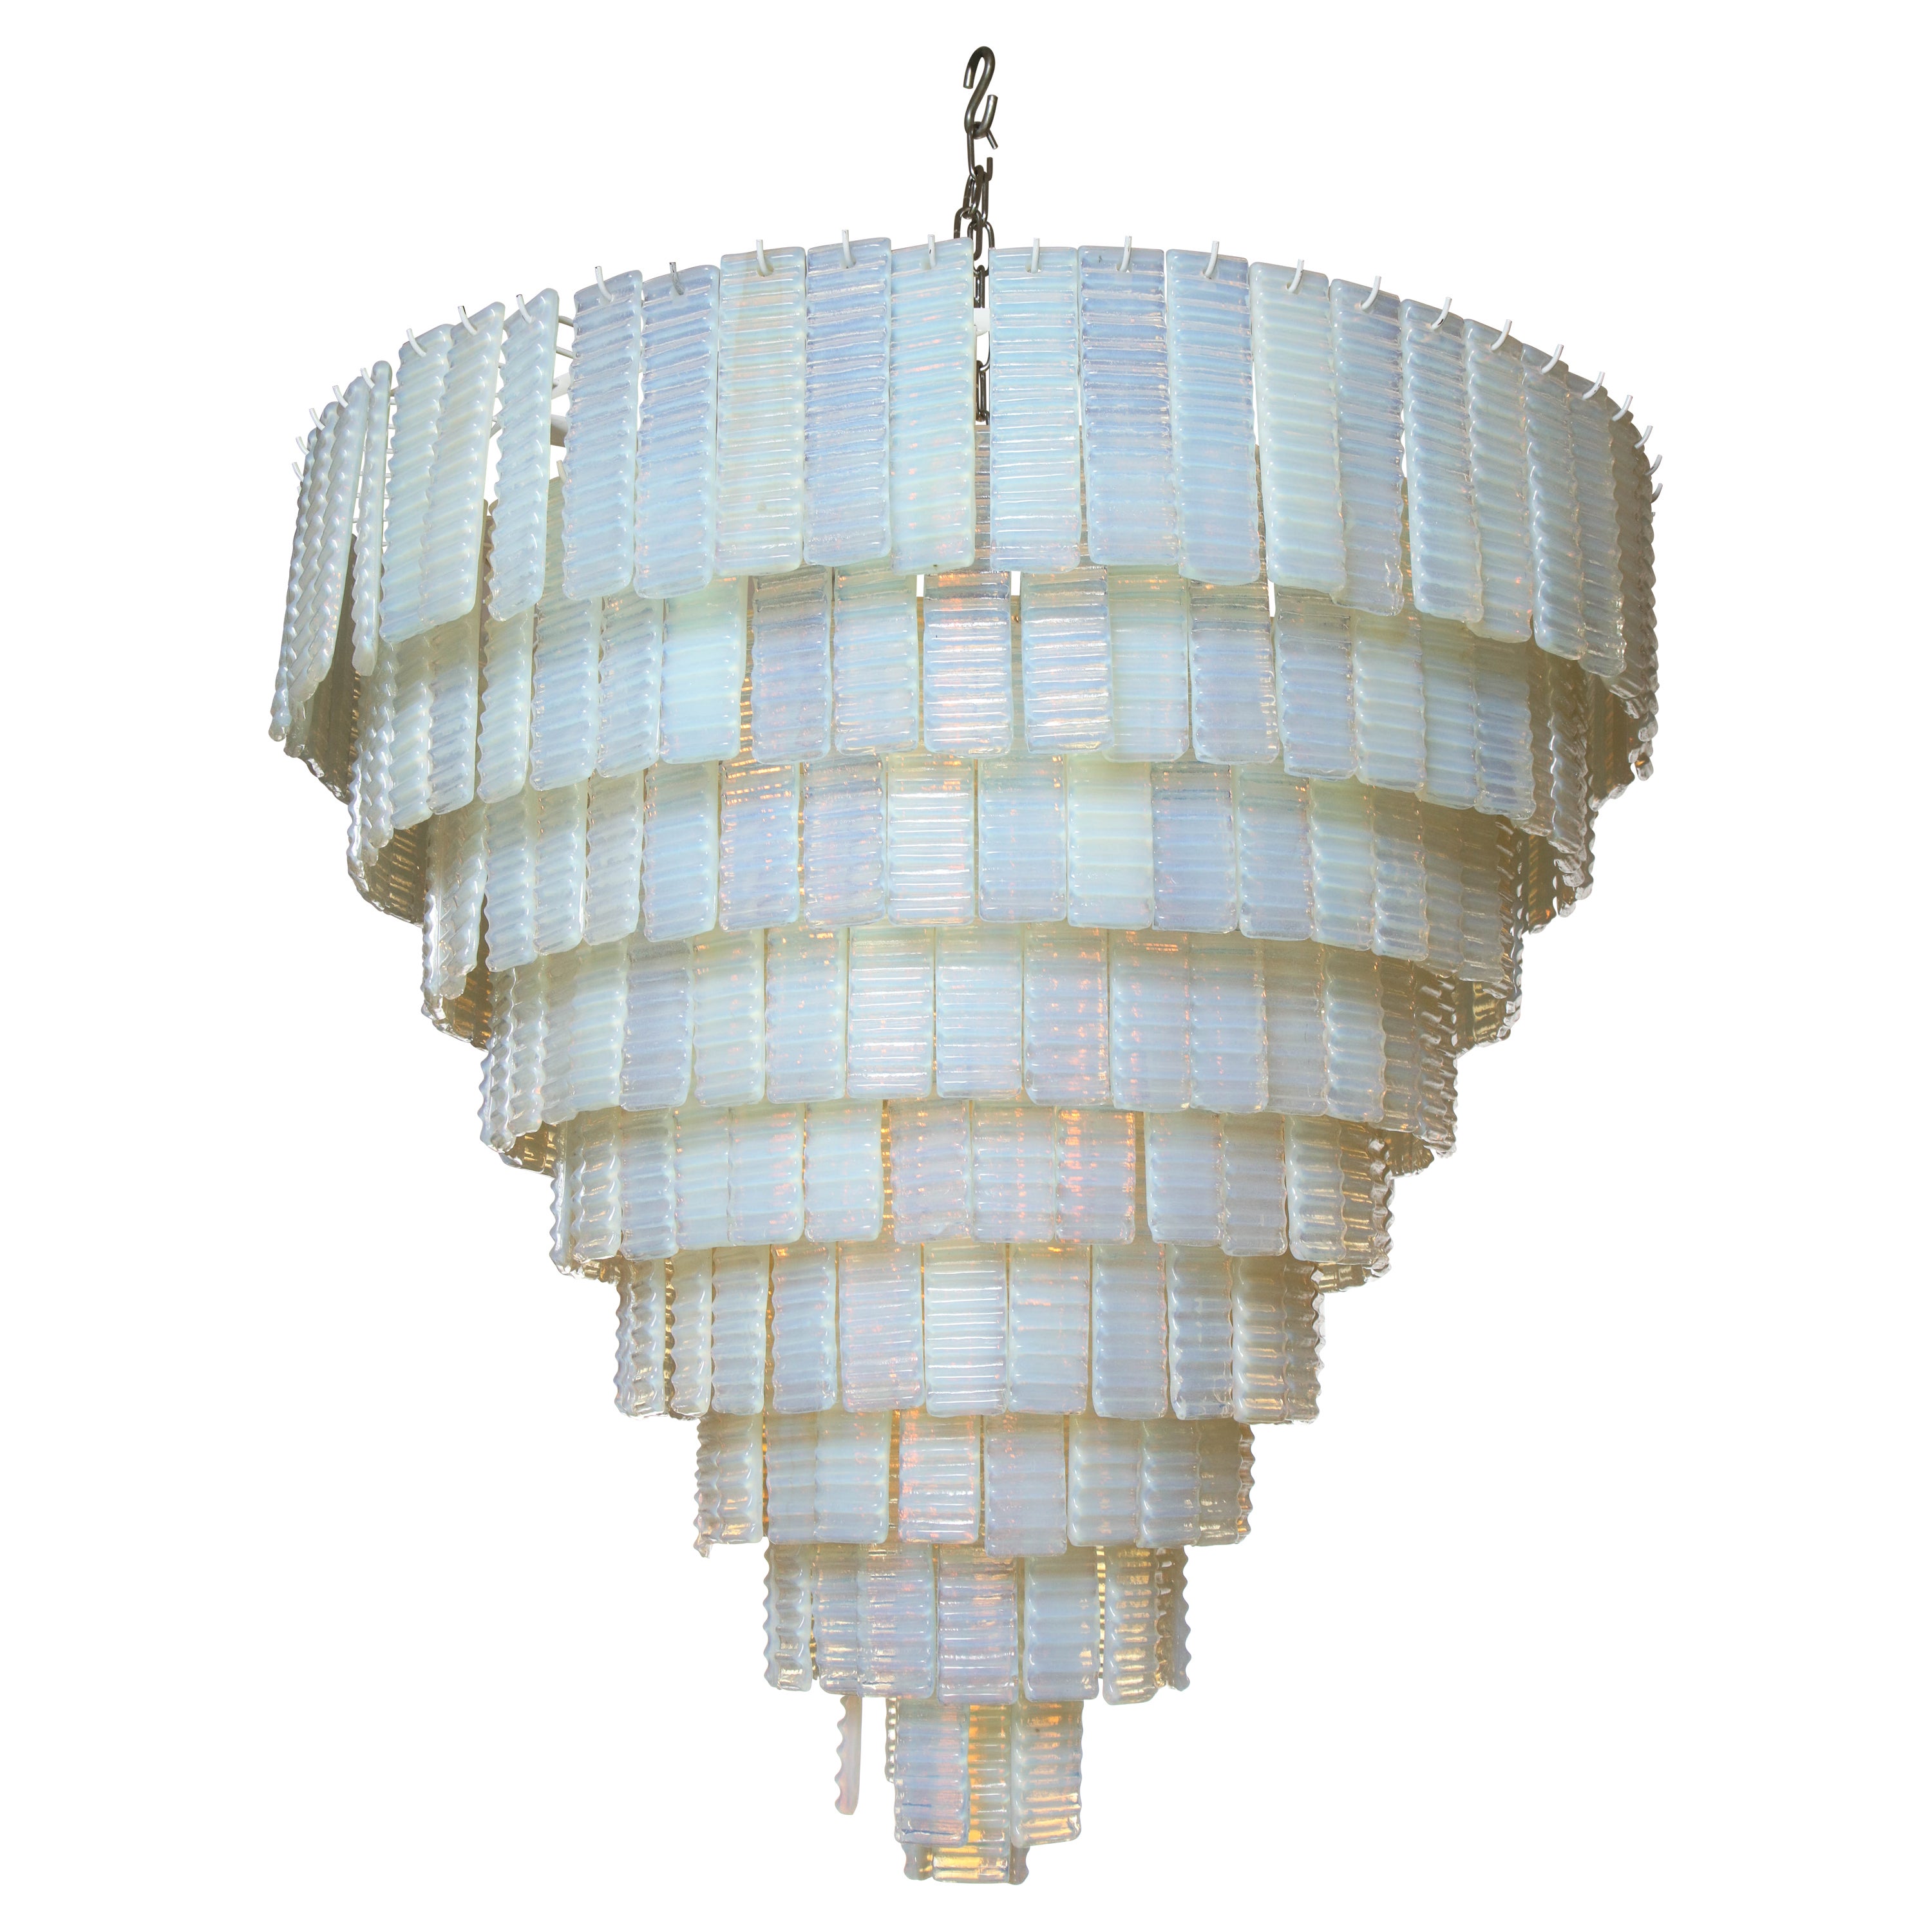 10 Tiered Corrugated Opalescent Murano Glass Chandelier in Round Shape